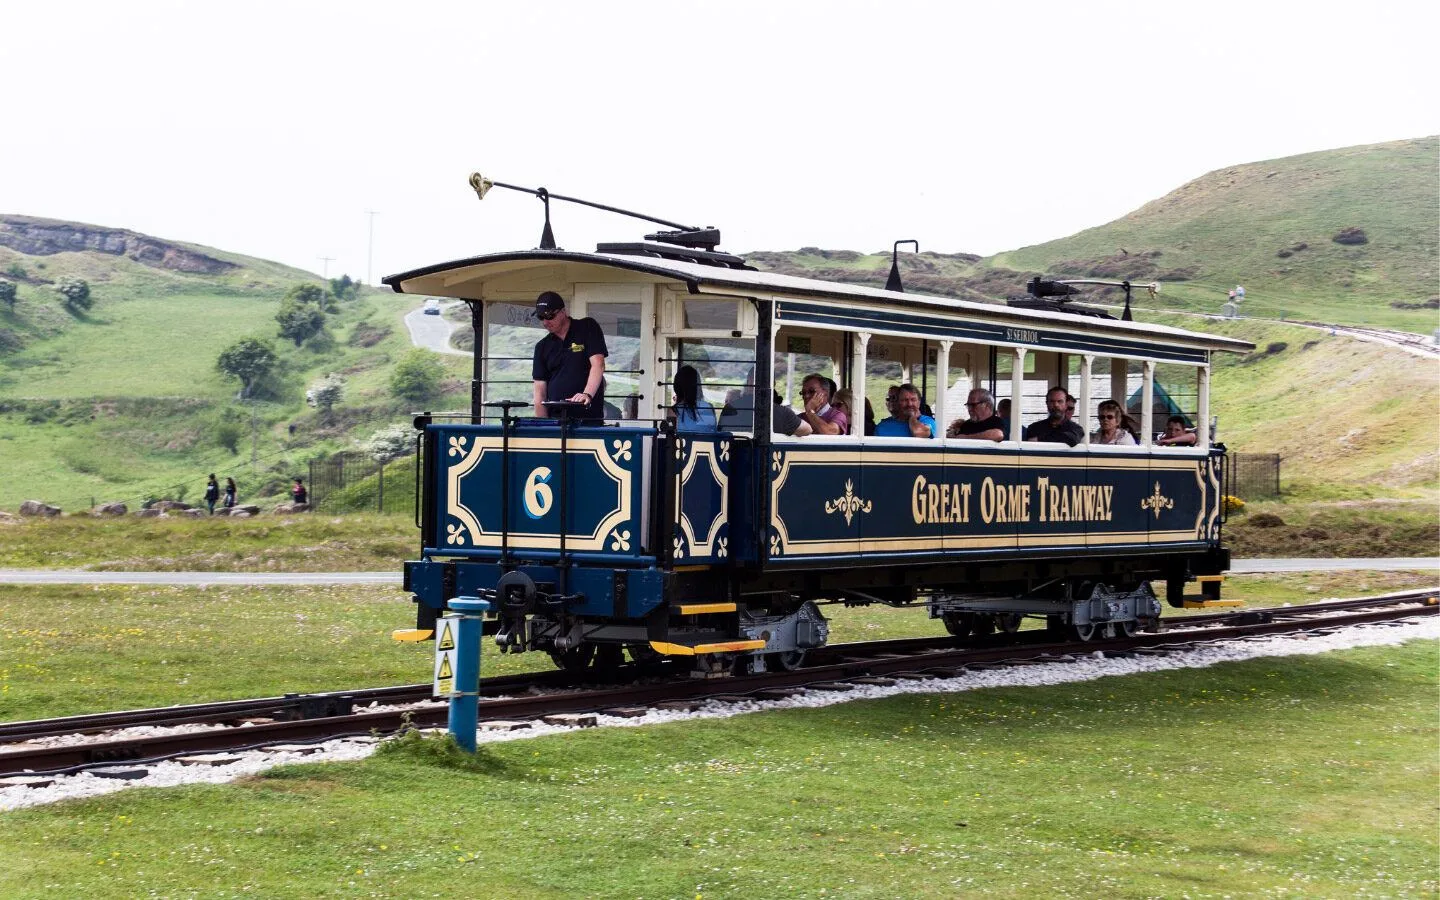 Llandudno's Great Orme Tramway for visiting Wales by train